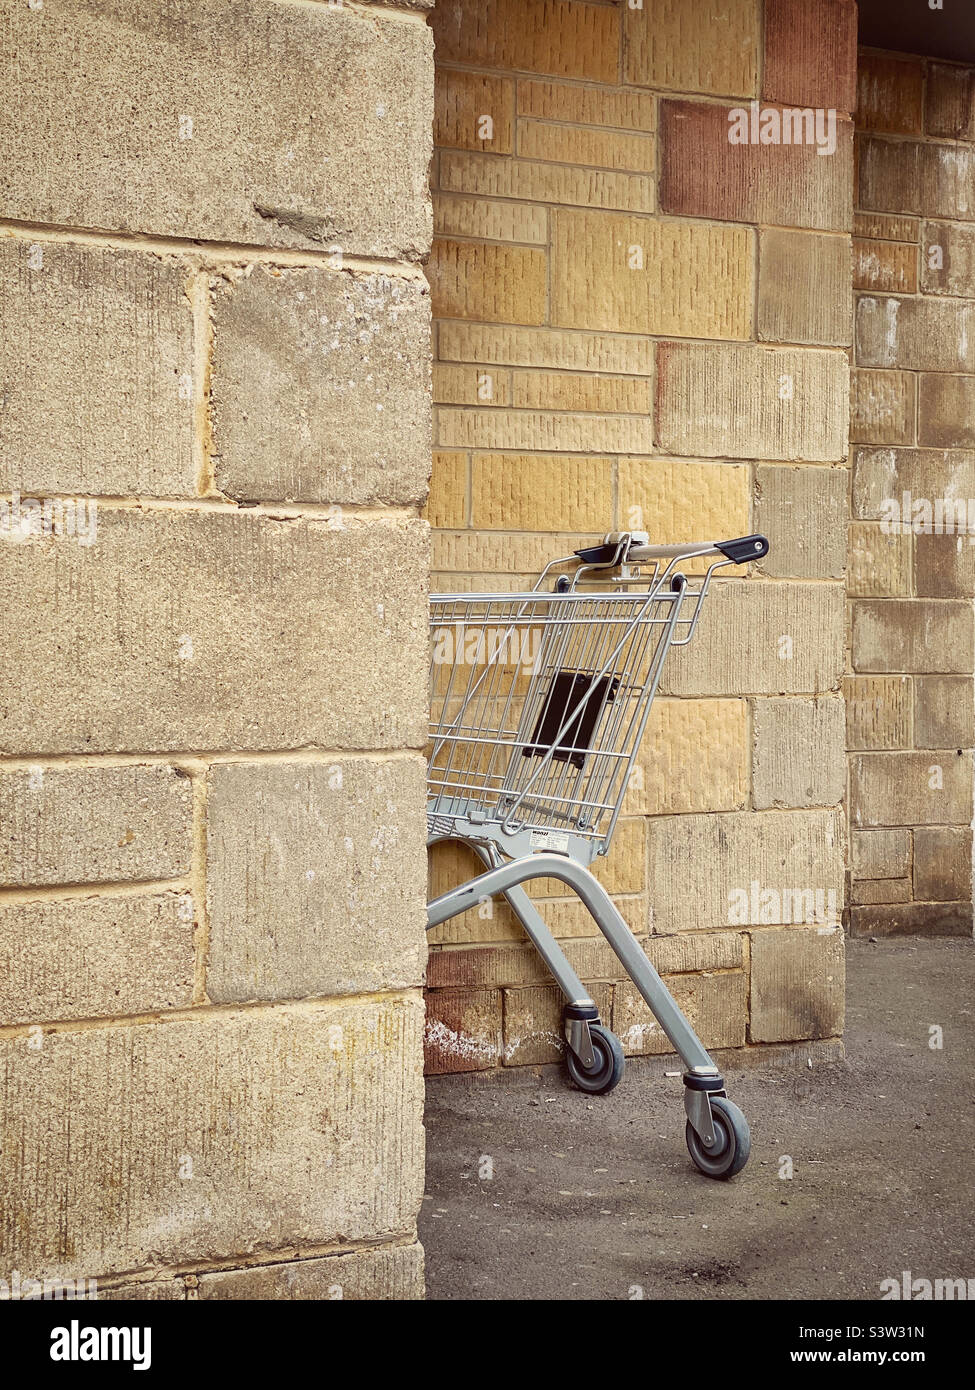 An abandoned shopping trolley? A shopping trolley trying to hide? Photo ©️ COLIN HOSKINS. Stock Photo